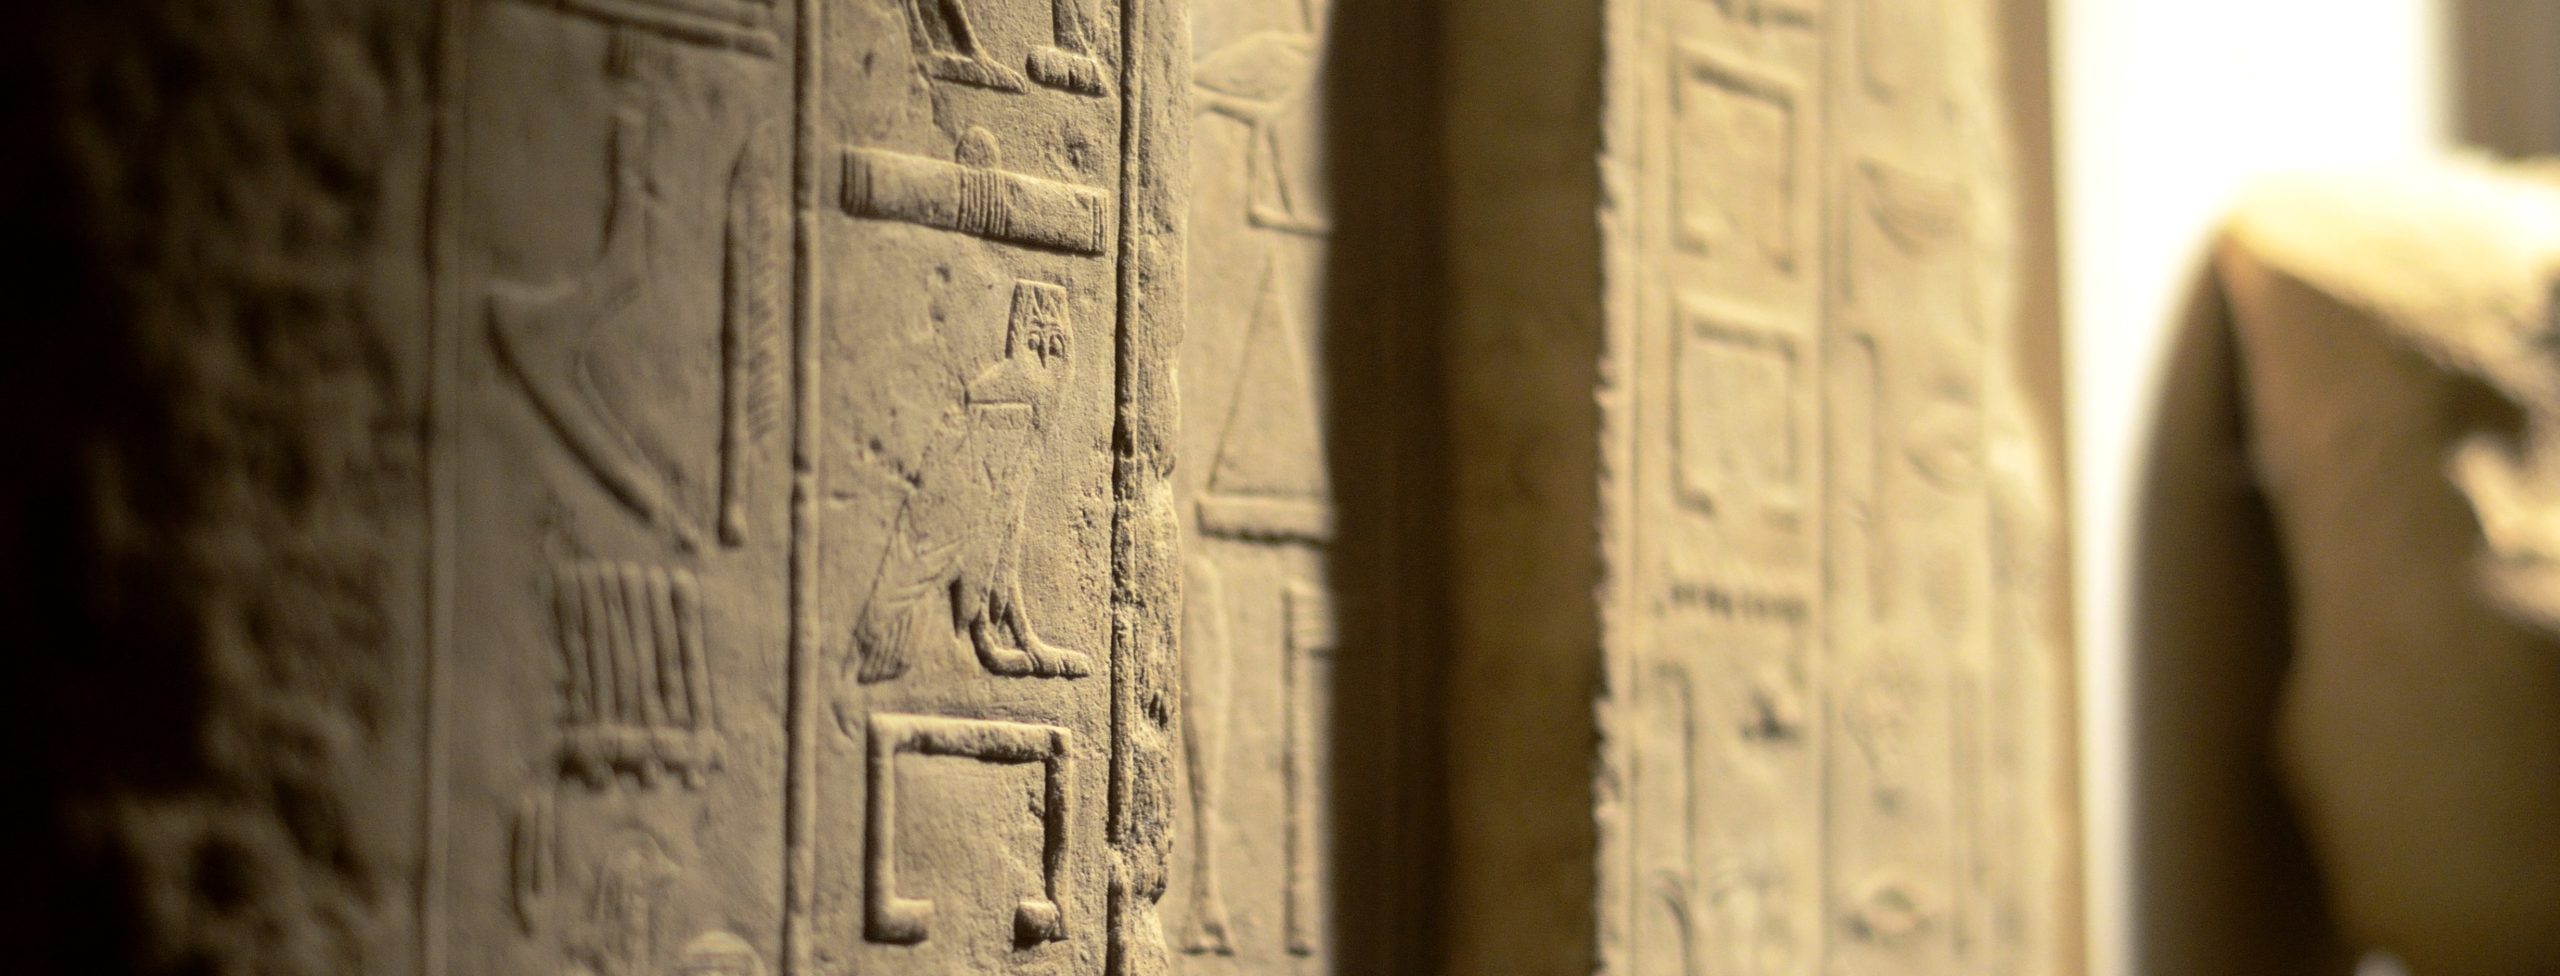 A close up of some of the ancient hieroglyphics on display at Egyptology LIVE.